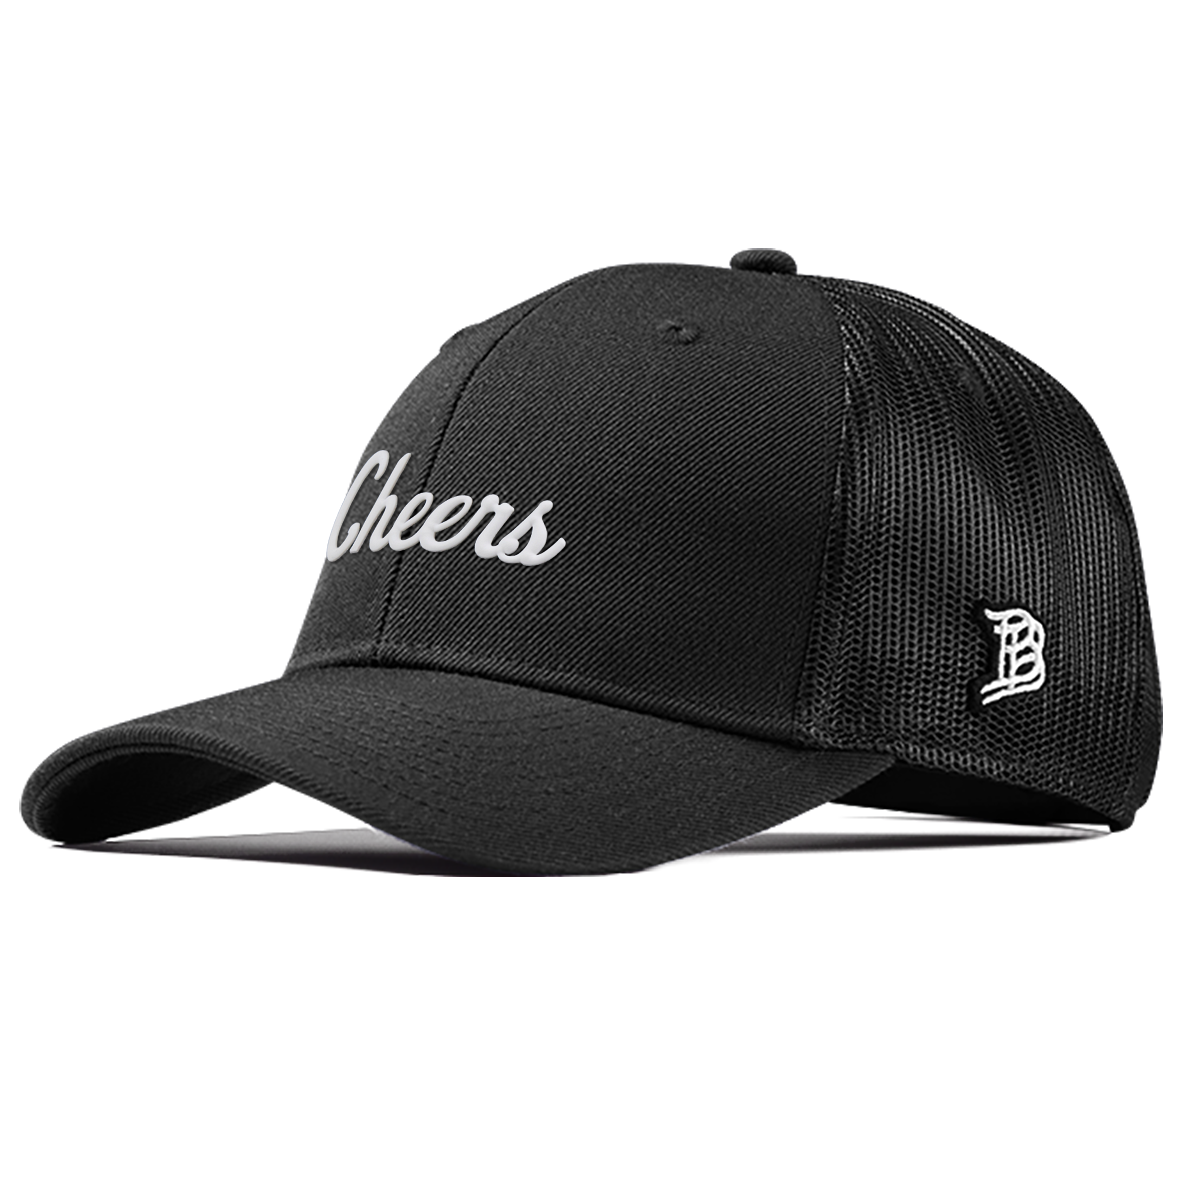 Oversized BB Cheers Curved Trucker